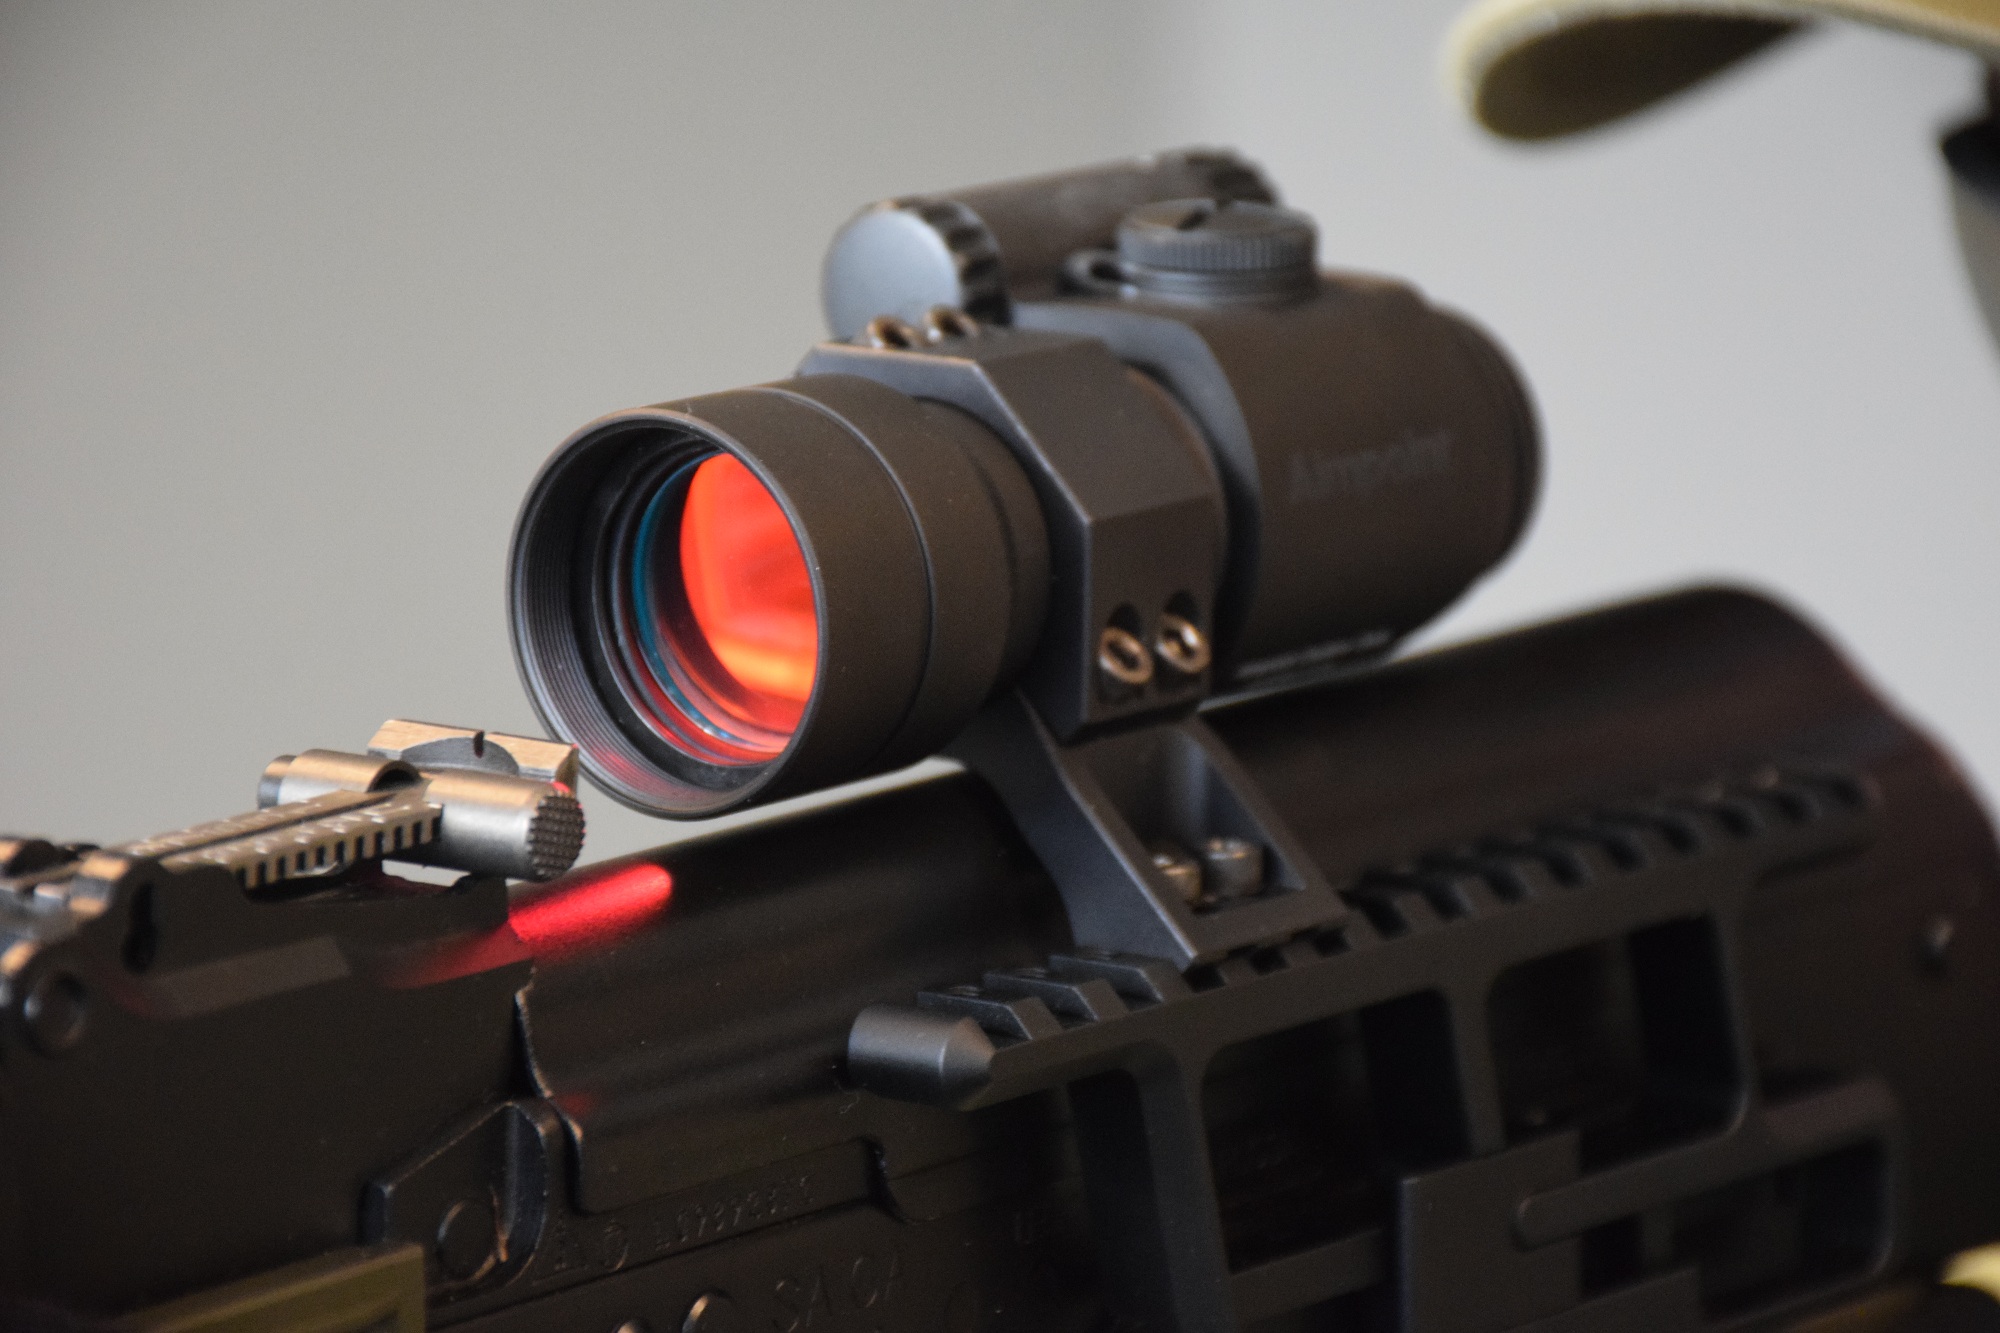 Review: The Aimpoint ACO Red Dot Sight OutdoorHub